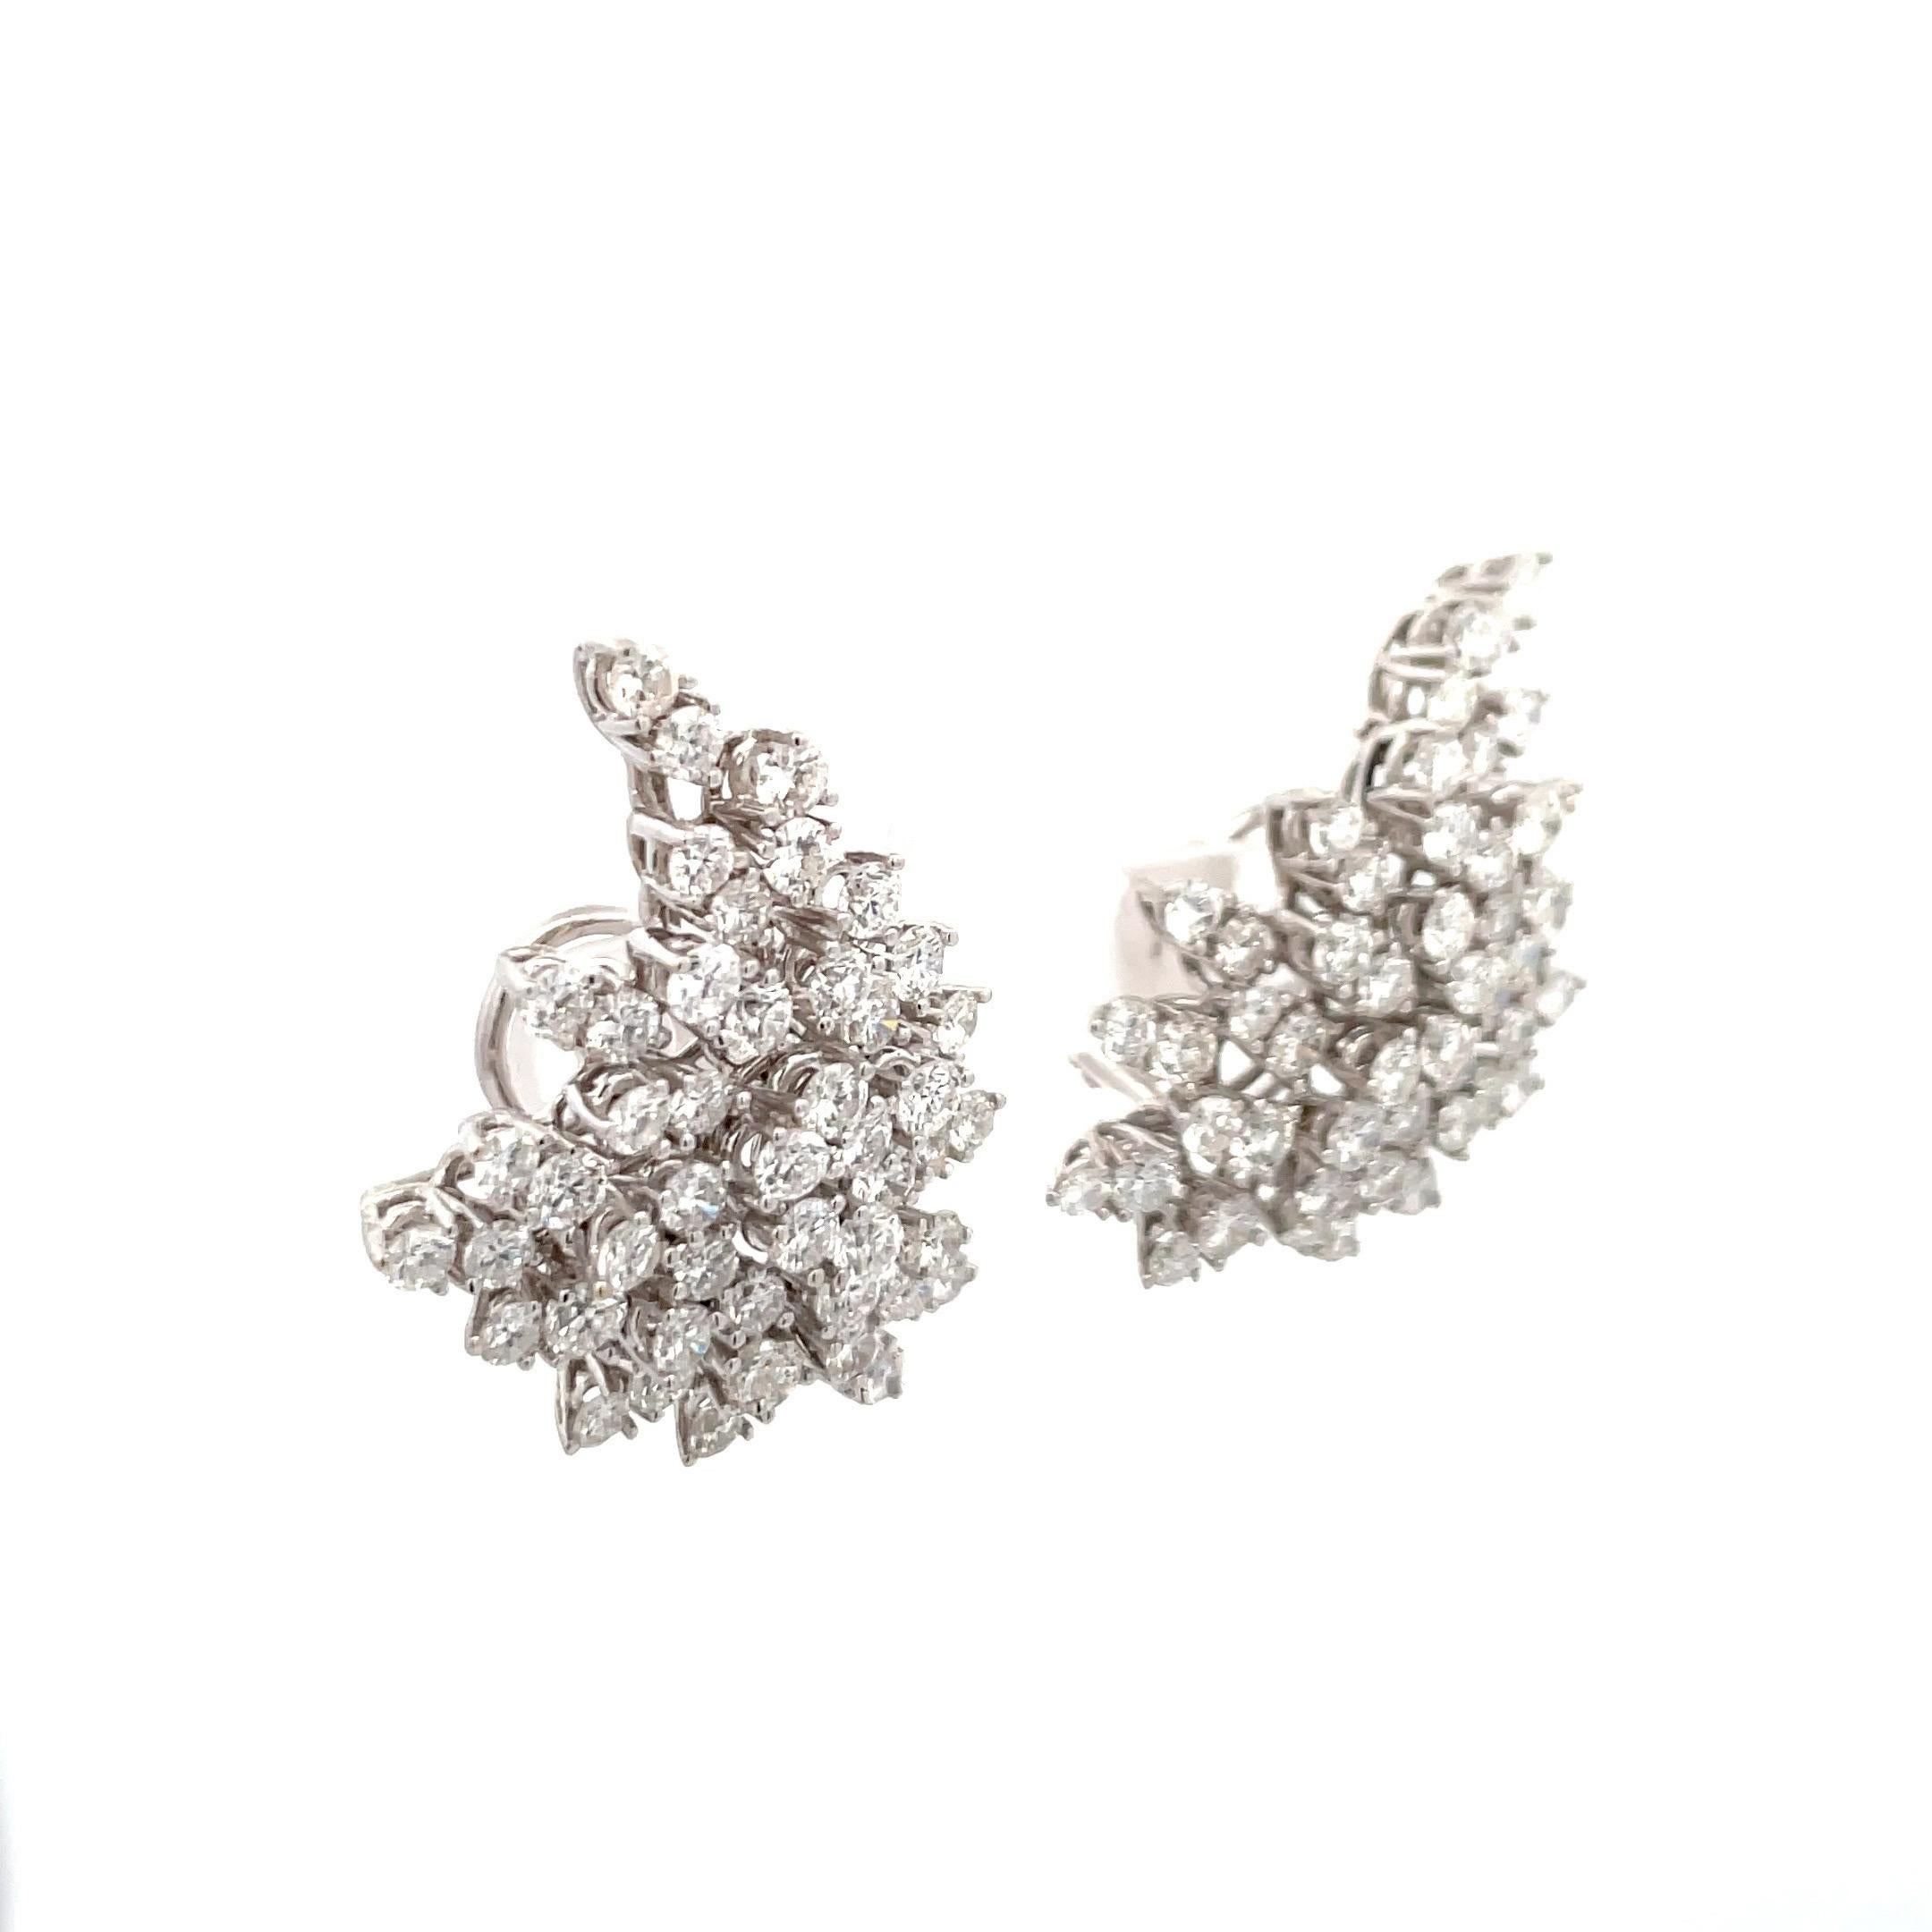 Contemporary Day & Knight Diamond Starburst Cluster Earrings 9.50 Carats 18 Karat White Gold